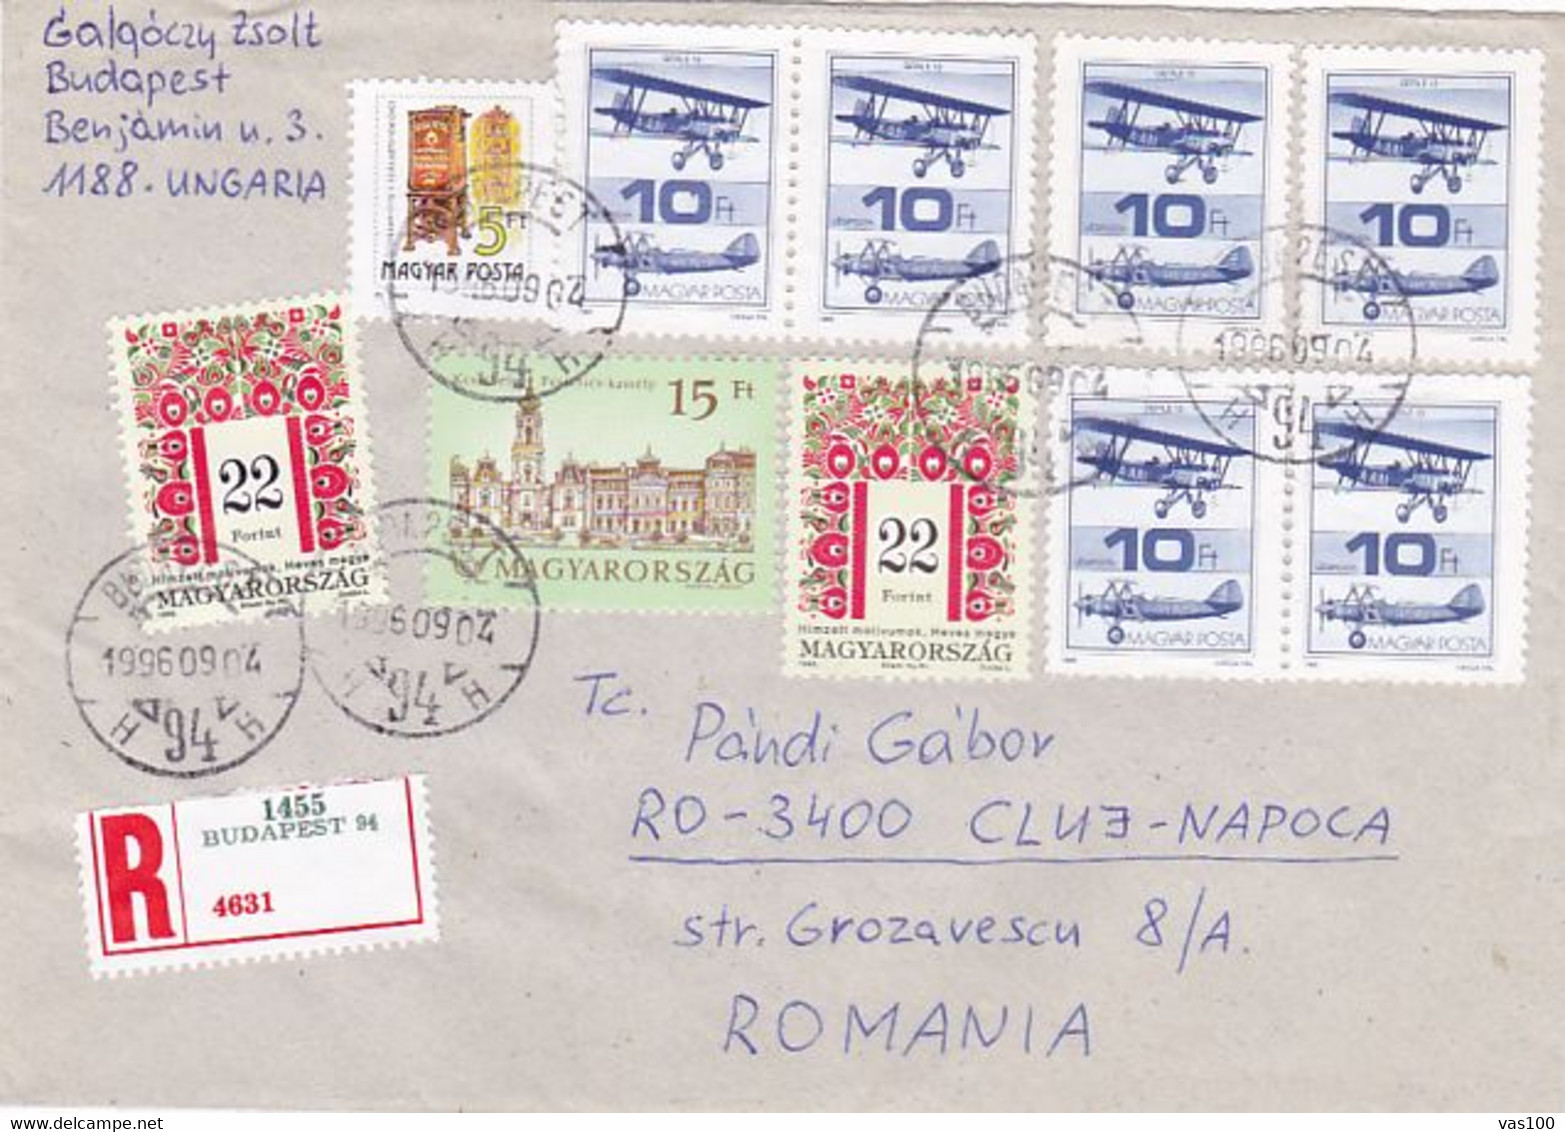 FOLKLORE ART, MACHINE CABINET, CASTLE, PLANE STAMPS ON REGISTERED COVER, 1996, HUNGARY - Briefe U. Dokumente